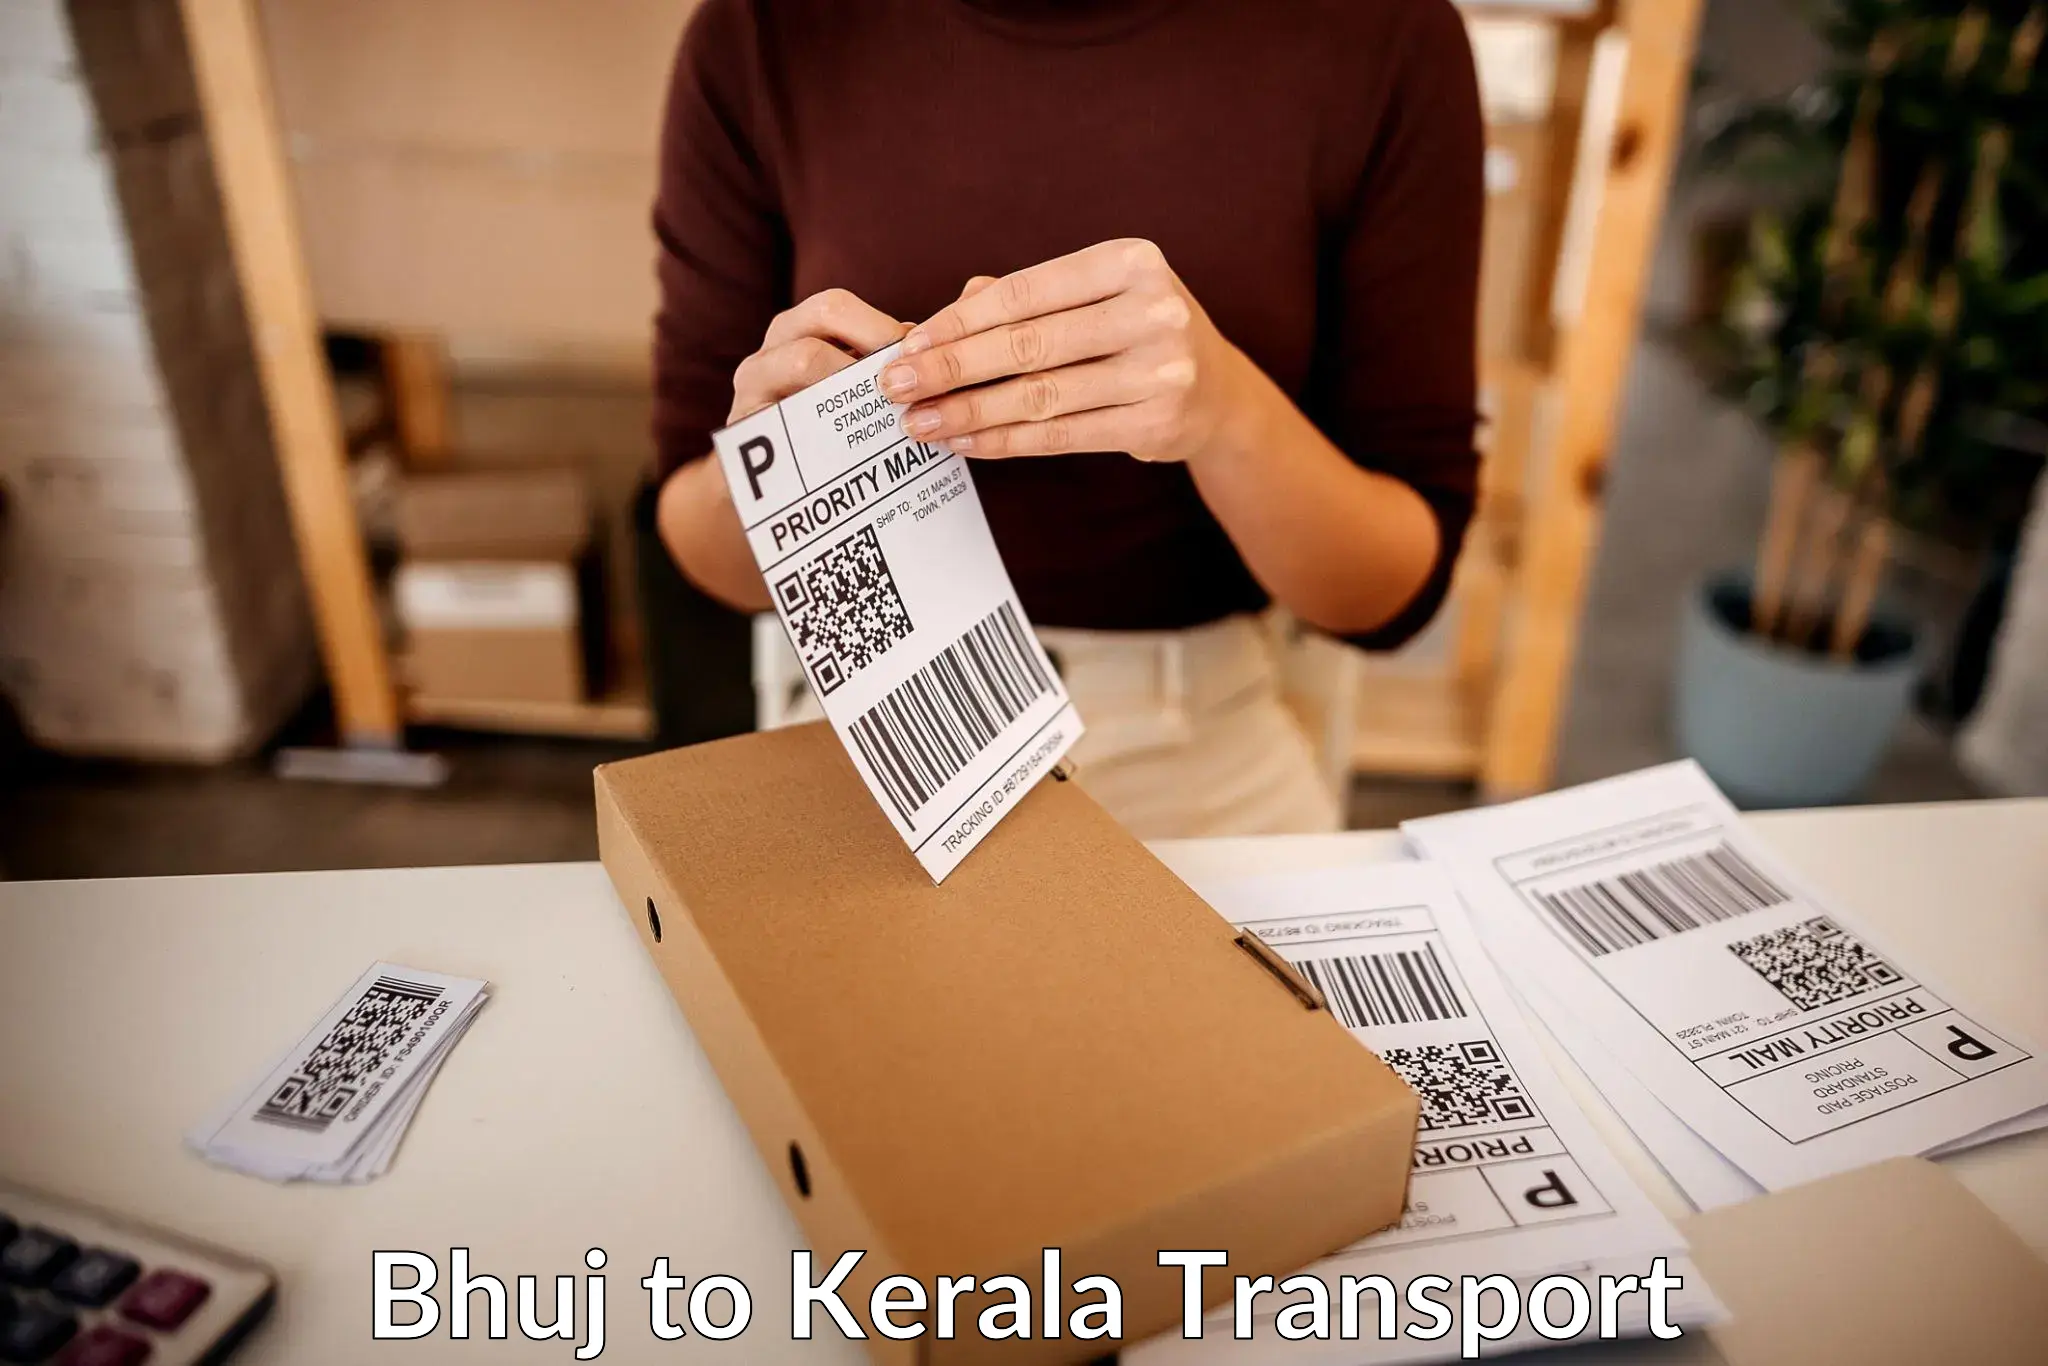 Parcel transport services Bhuj to Cochin University of Science and Technology